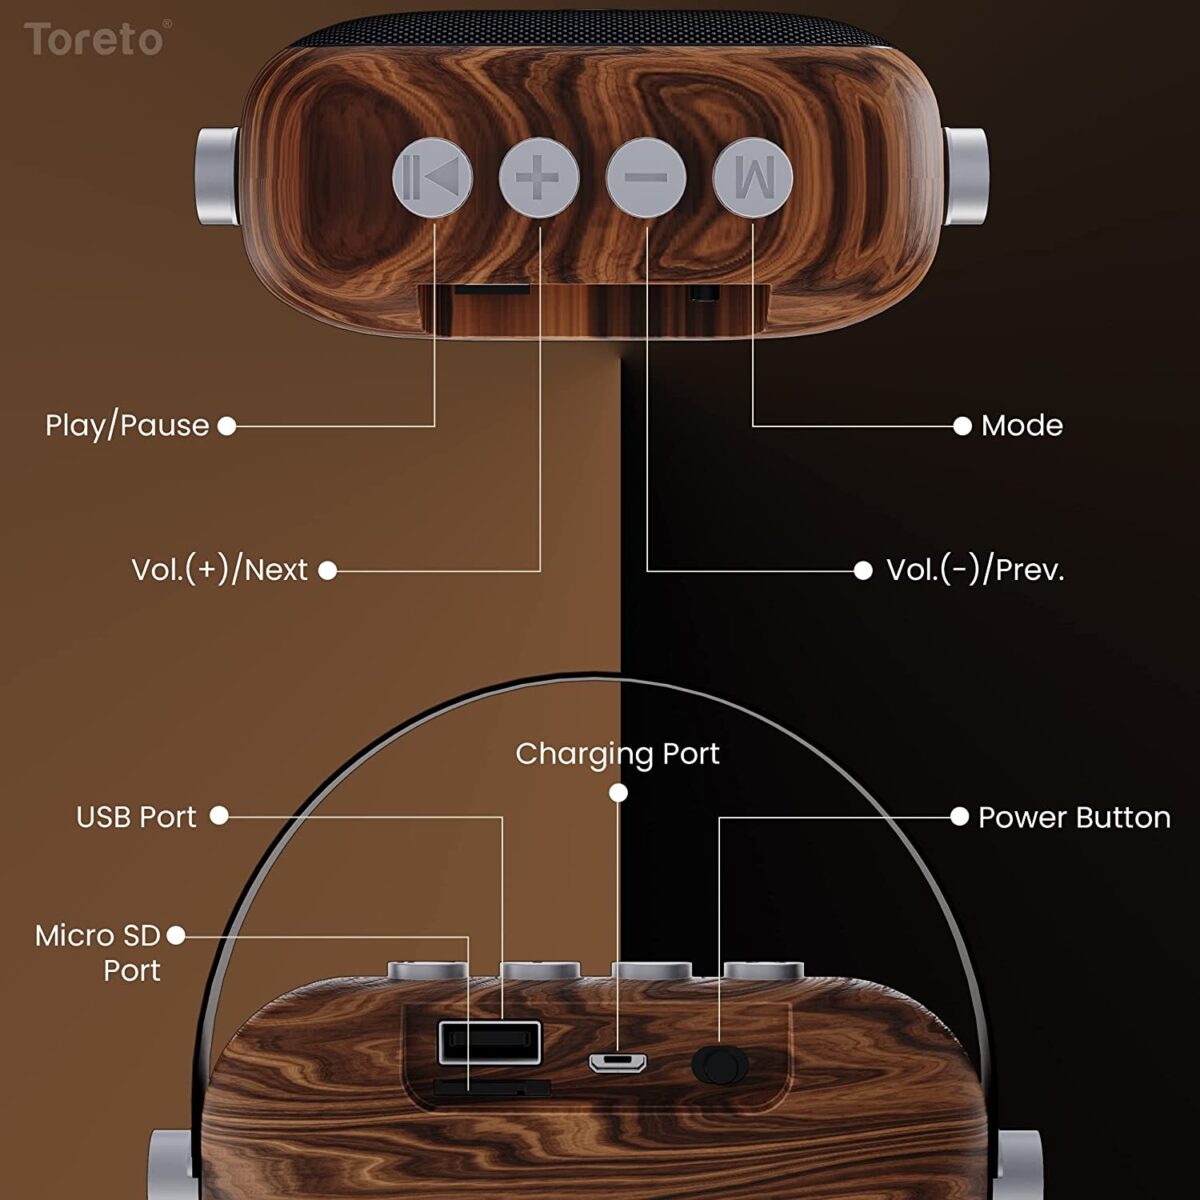 Toreto TOR 349 Timber Max Bluetooth v5.0 Speaker 4 Shop Mobile Accessories Online in India